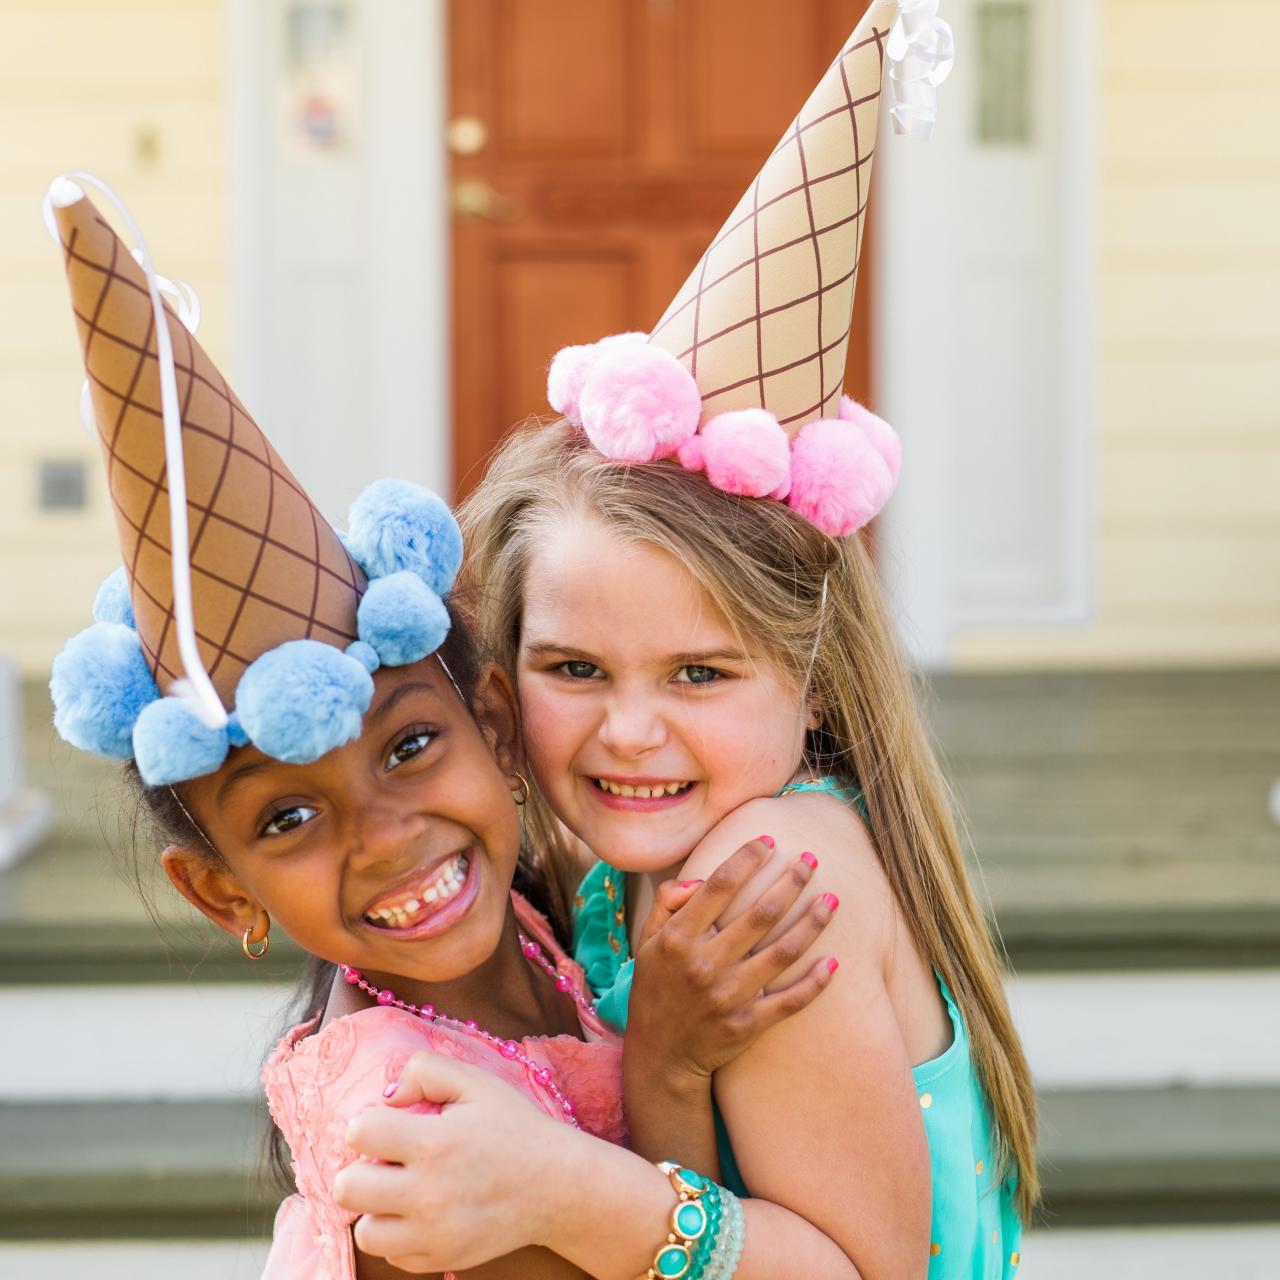 bag grænseflade mandig How to Make Ice Cream Cone Party Hats | 10 Tips for Easy Entertaining | HGTV